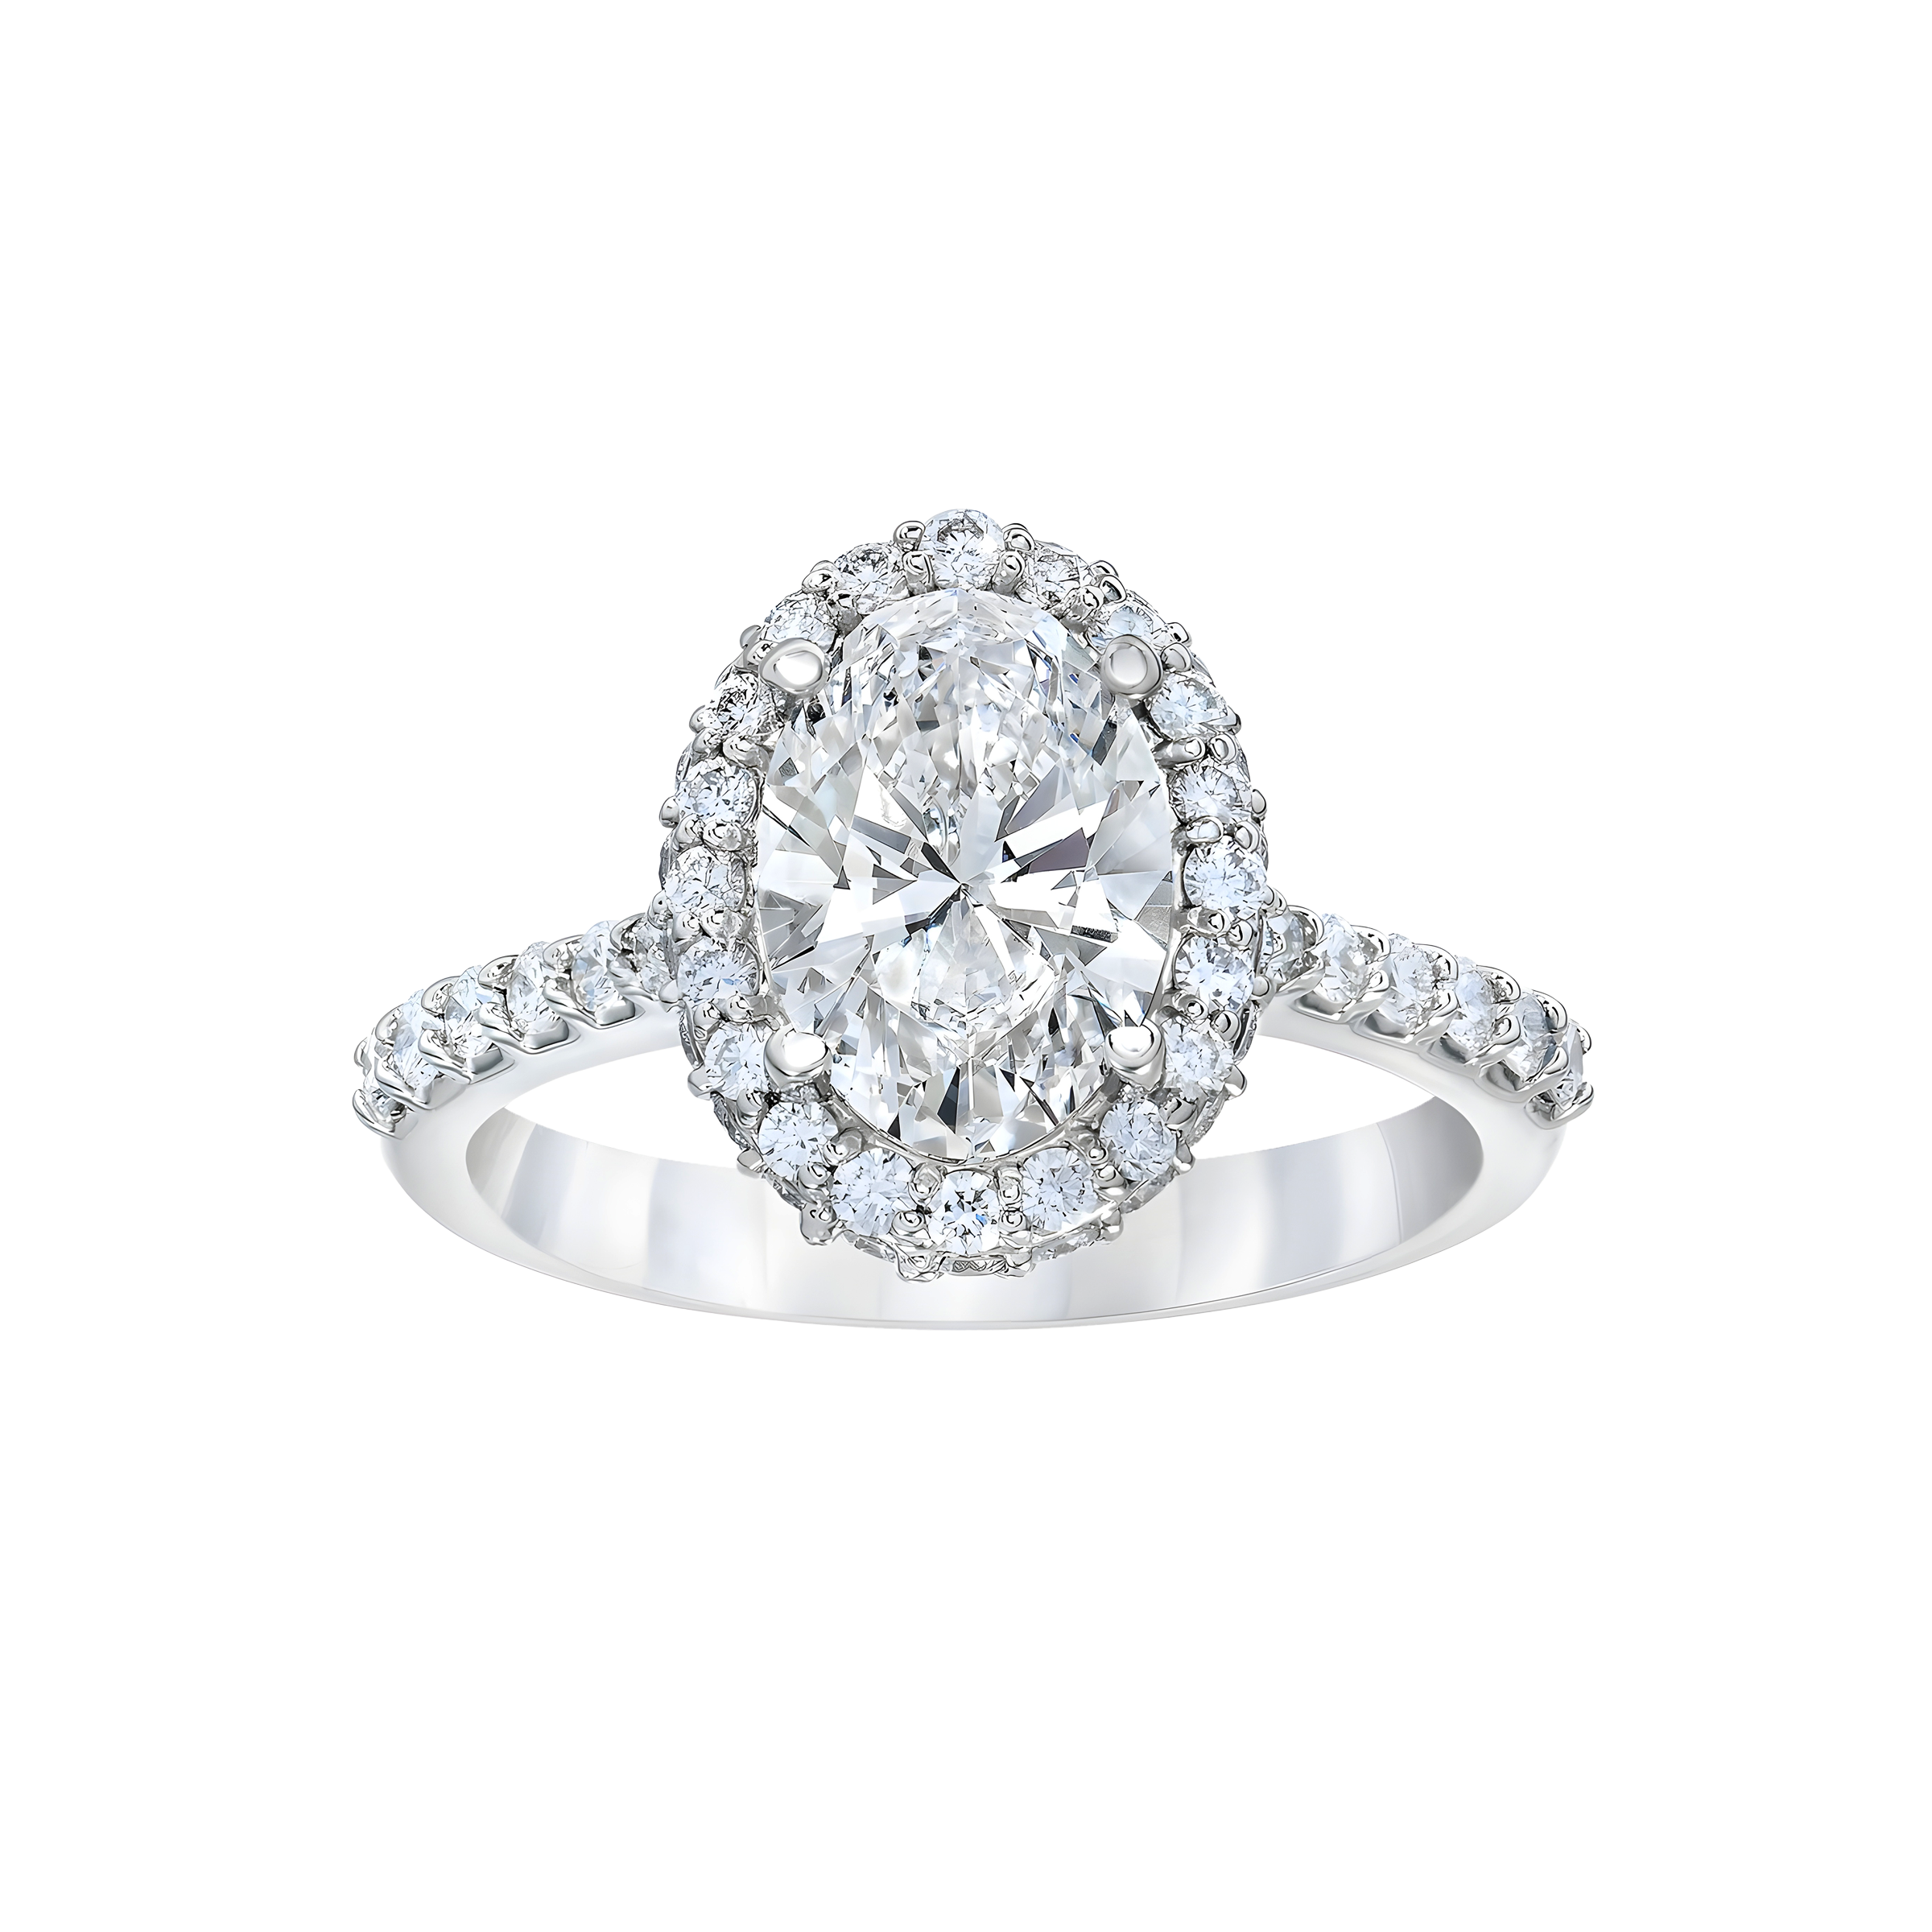 Oval Shaped Diamond Halo Engagement Ring in Platinum